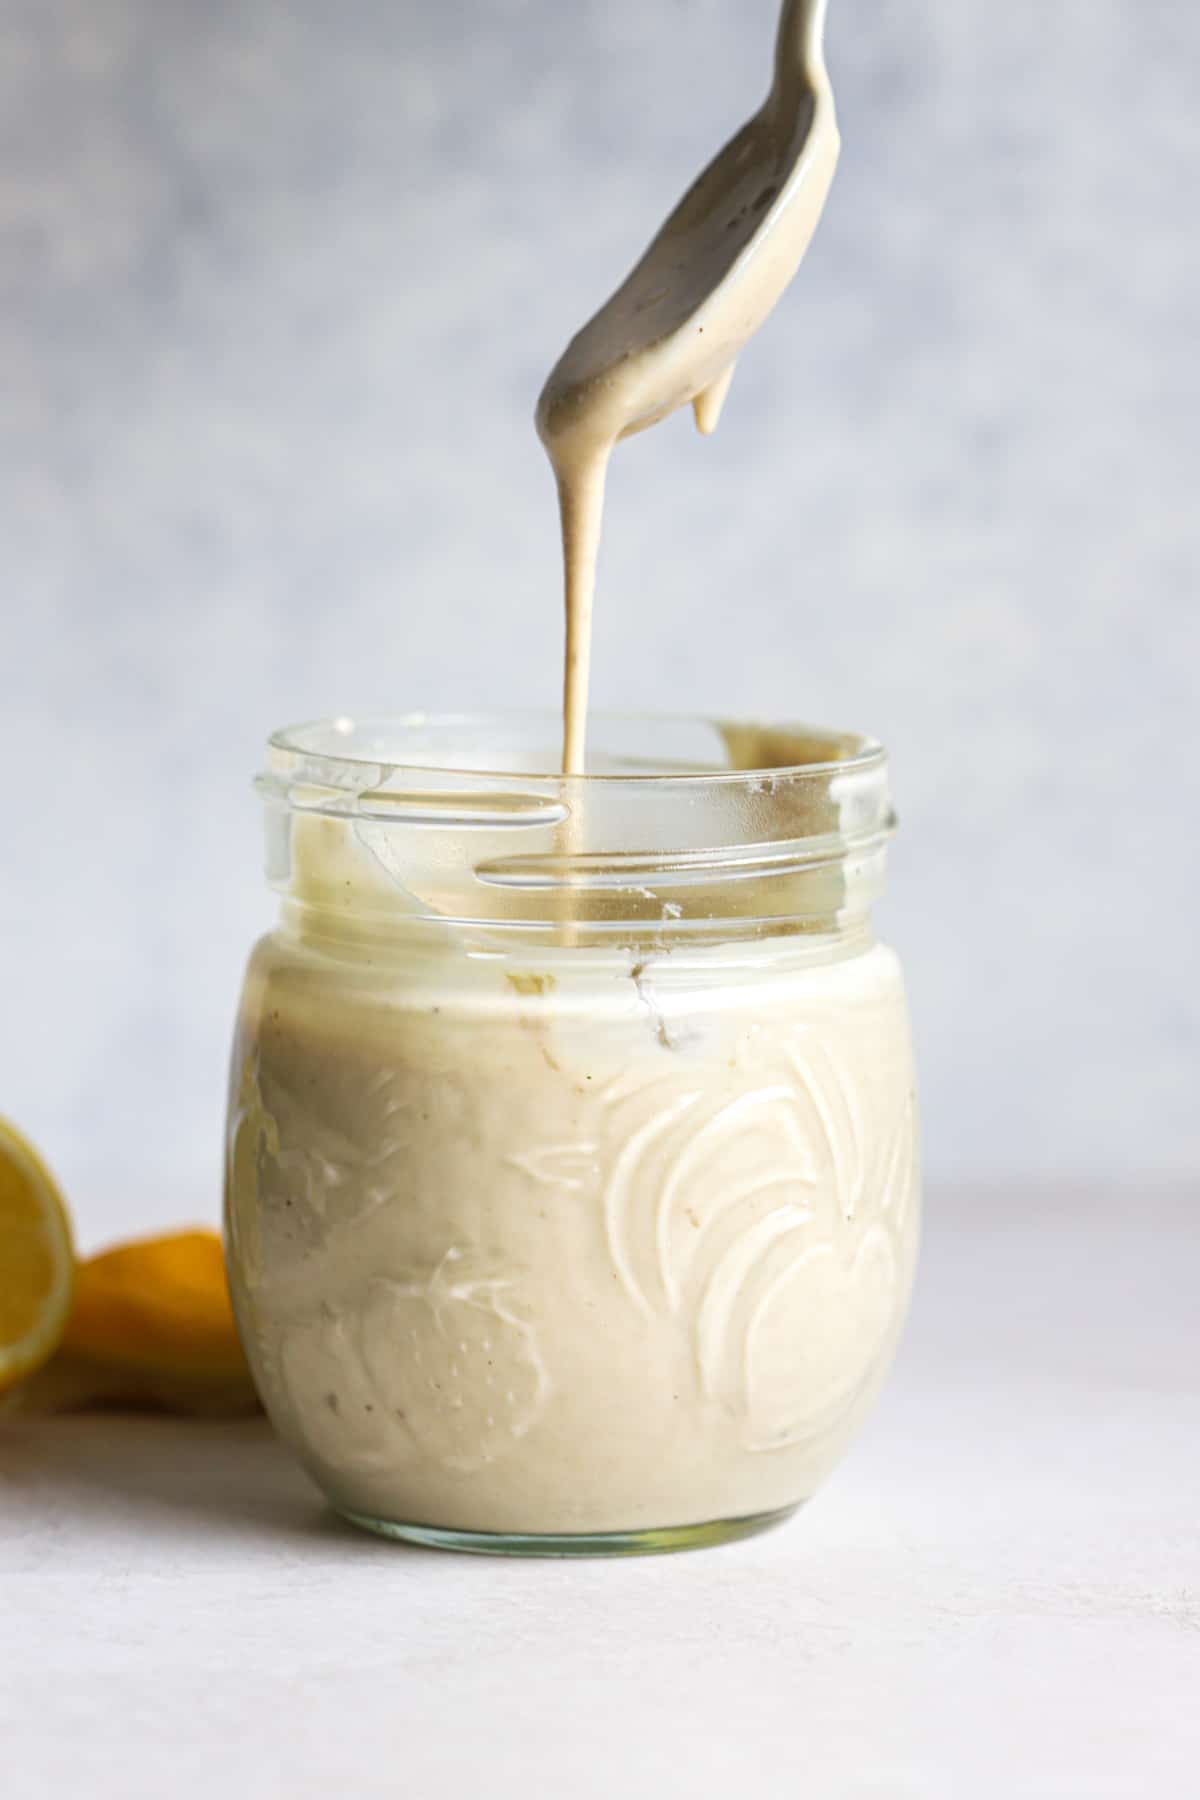 Tahini sauce dripping off of spoon into small glass jar, with lemons in the background